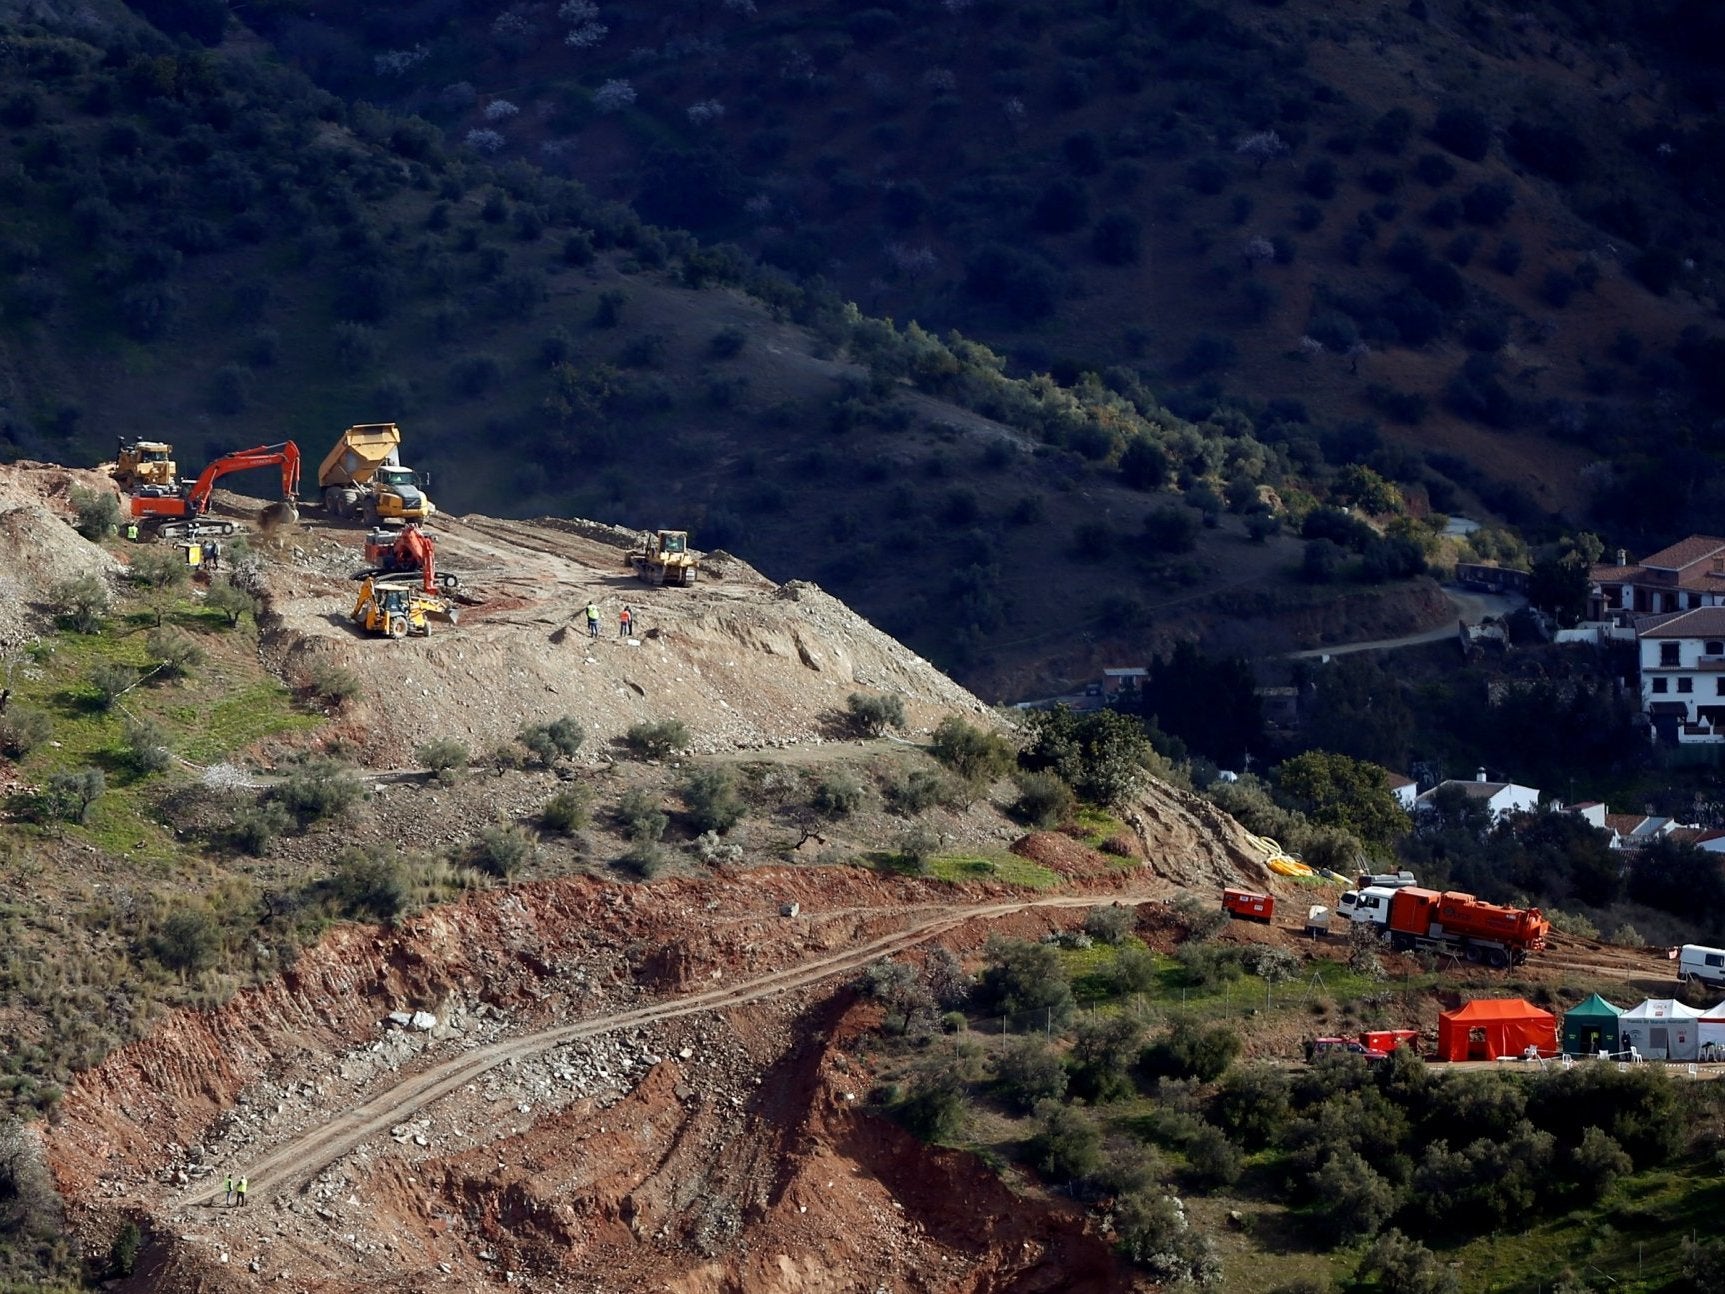 Diggers and trucks remove sand at the area where Julen, a Spanish two-year-old boy fell into a deep well